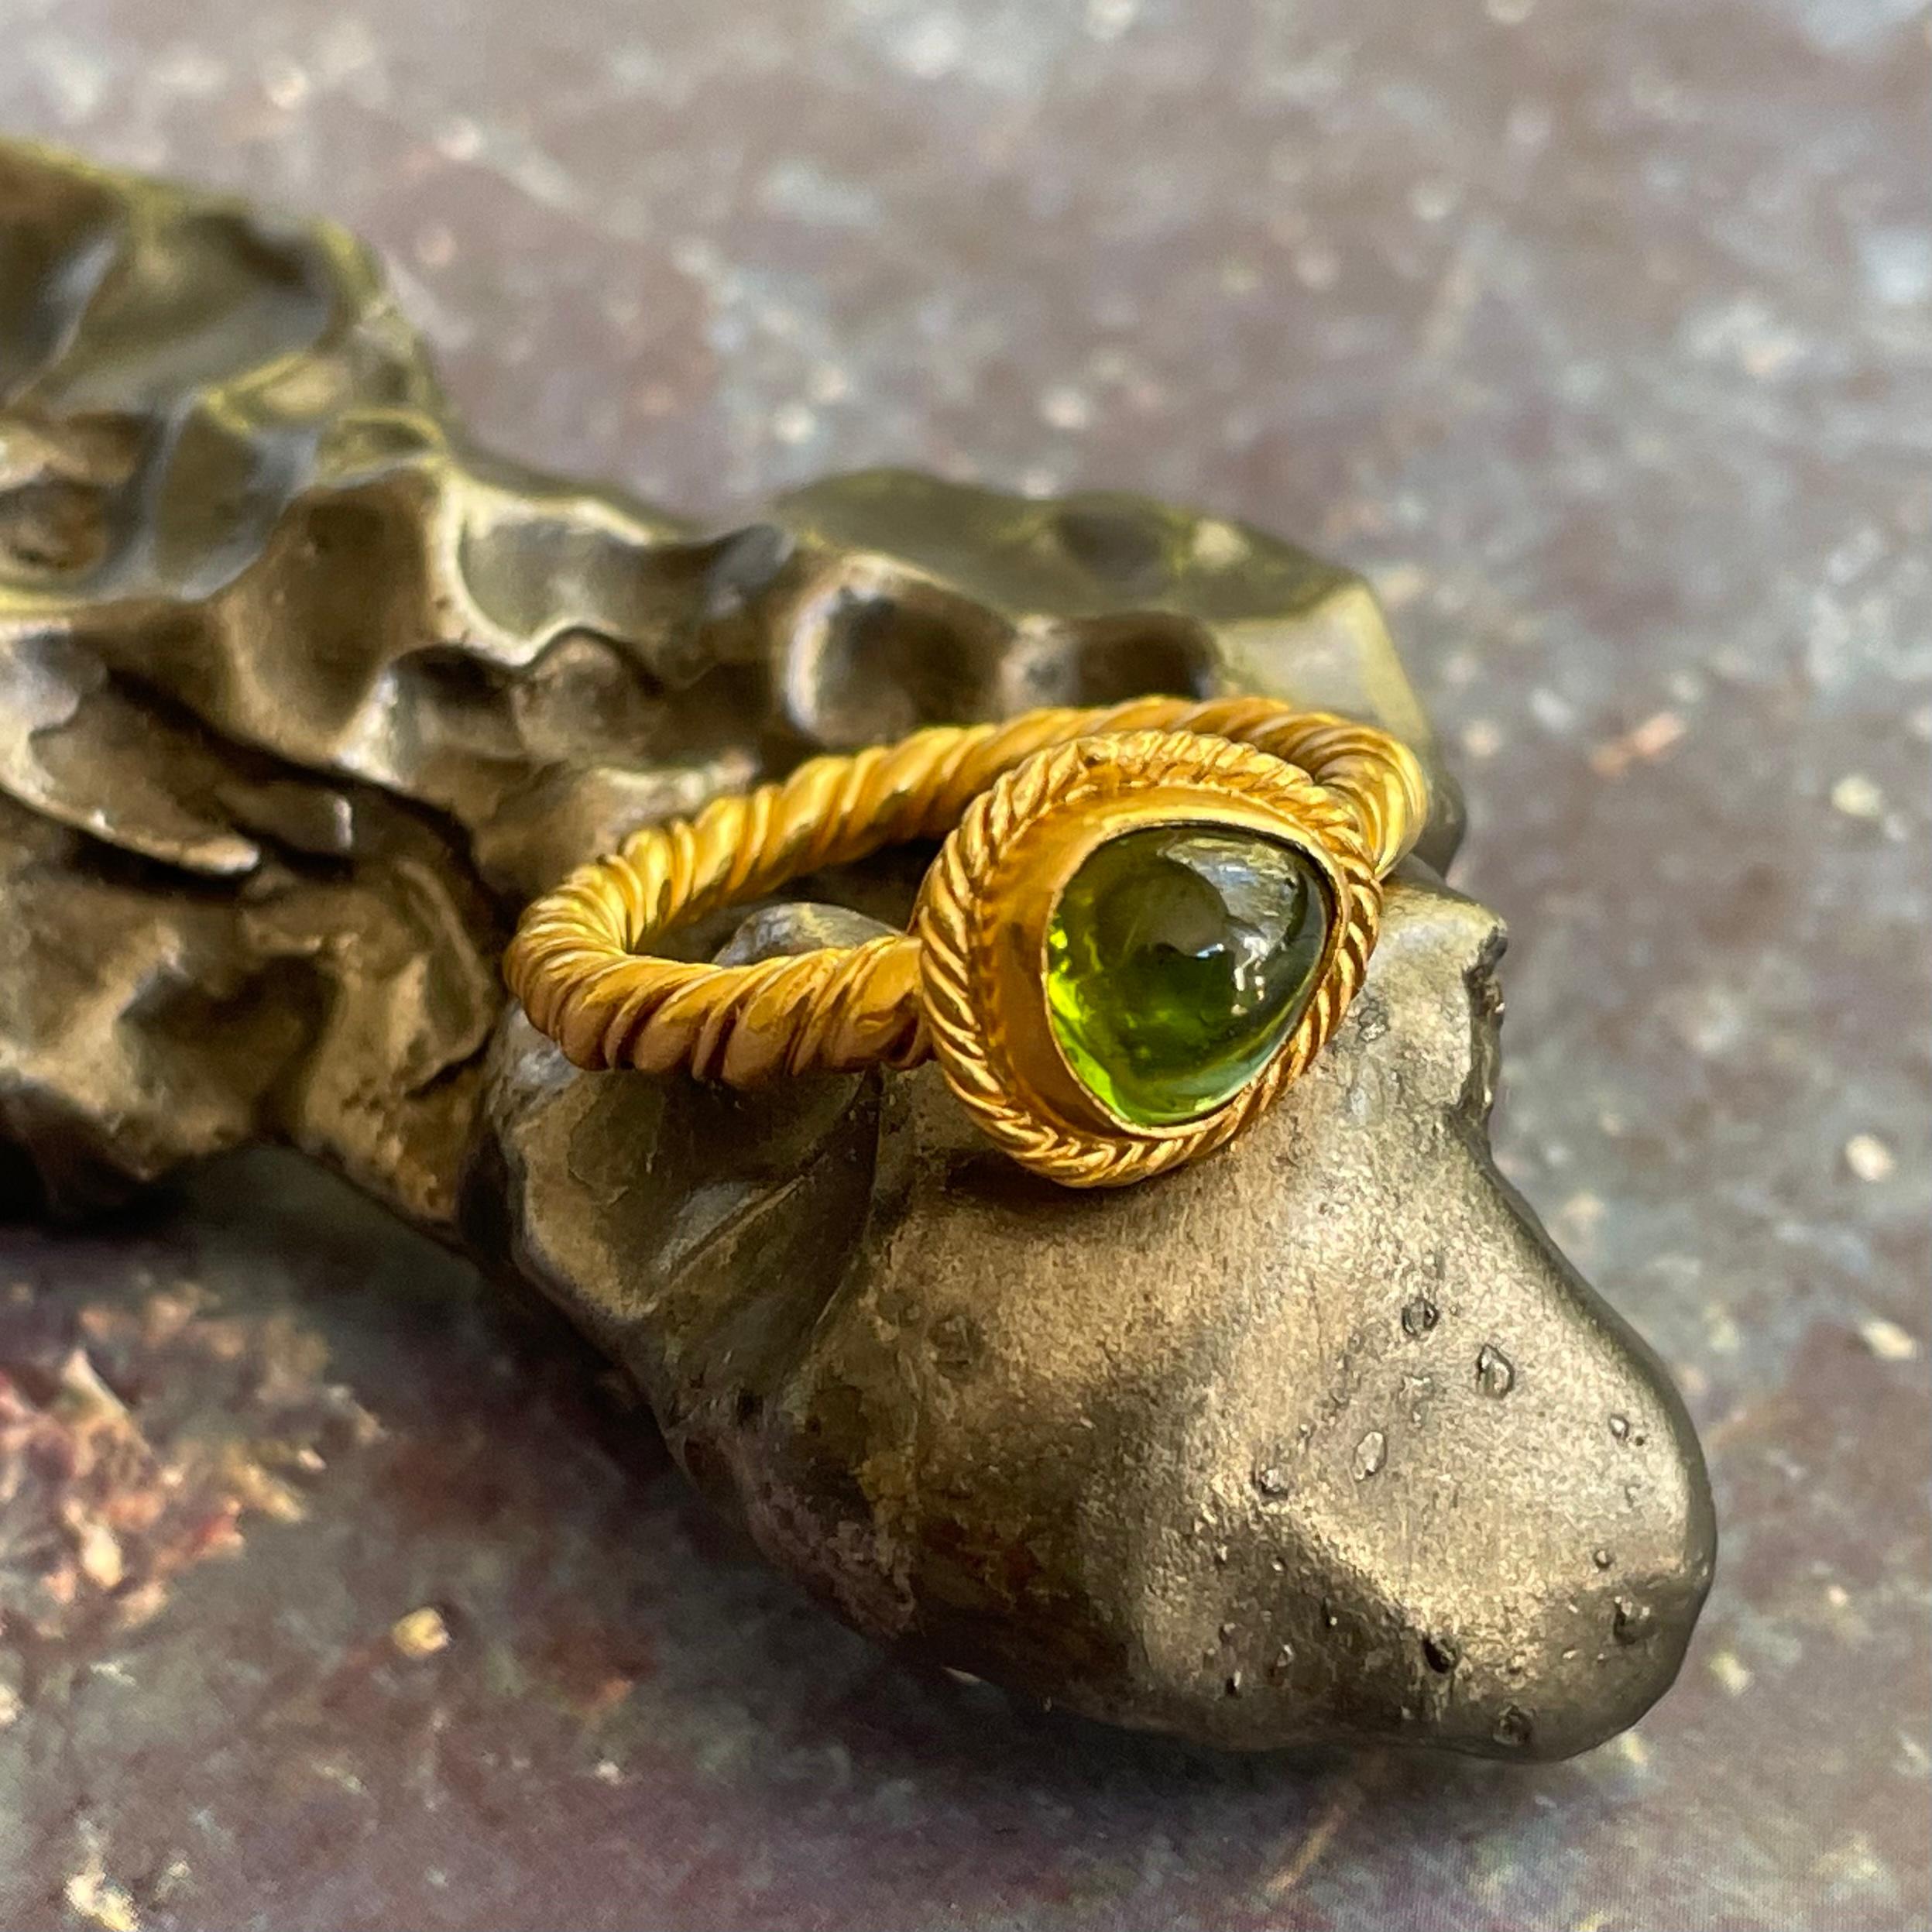 An interesting slightly irregular approximately 6 x 7  mm green tourmaline cabochon is held in a rich 22 carat gold twist wire embrace within a hefty large and small twist wire handmade ancient-inspired shank.  Something out of an Etruscan tomb